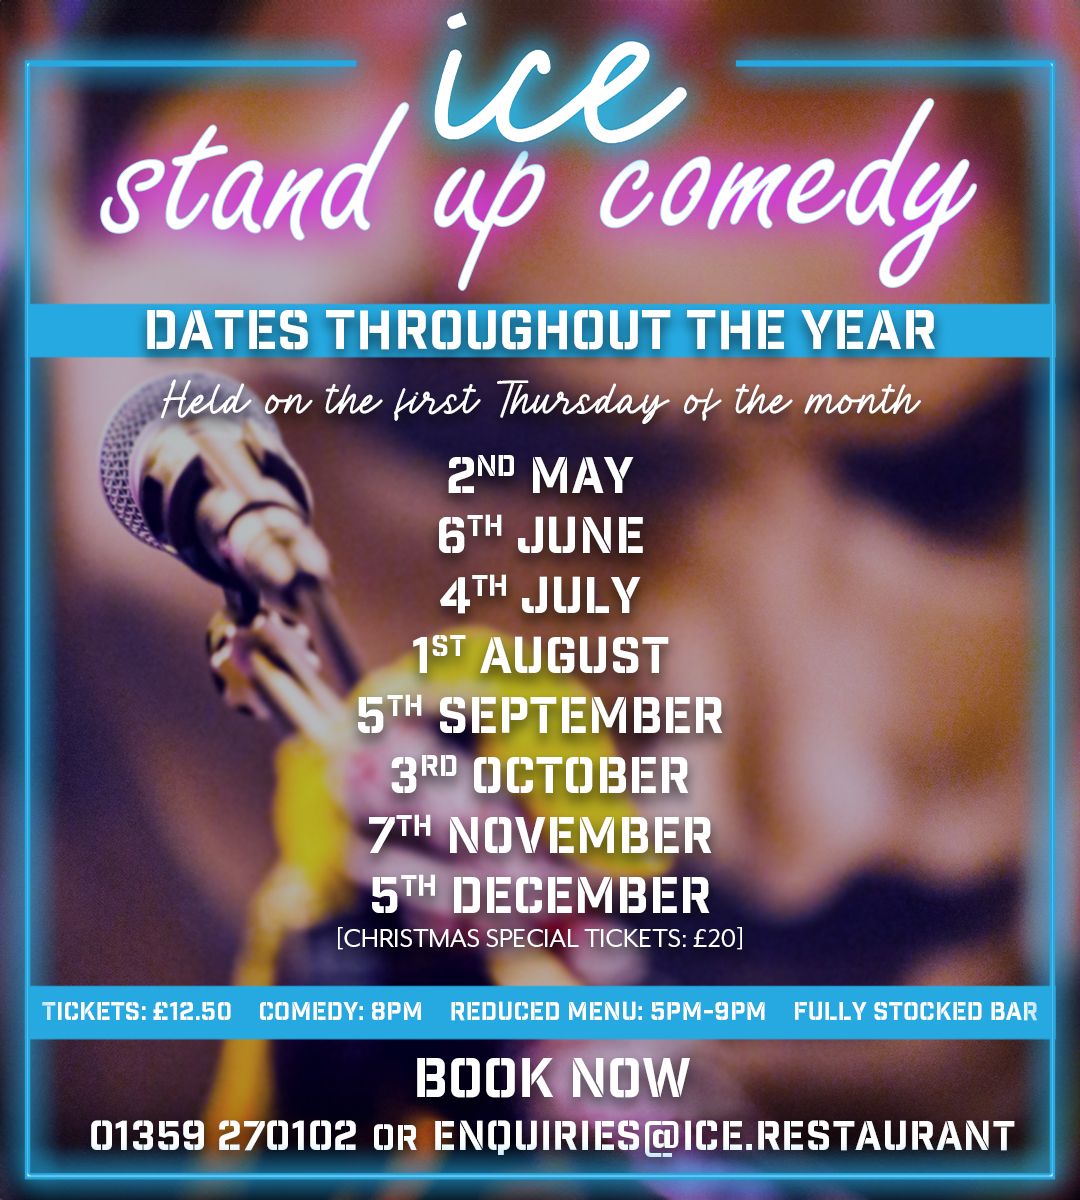 Looking for a side-splitting night out? Join @ICEsuffolk at their Stand Up Comedy Night this Thursday 2 May! 🎙🤣 Book now! 👉 visit-burystedmunds.co.uk/events/ice-sta… #BuryStEdmunds